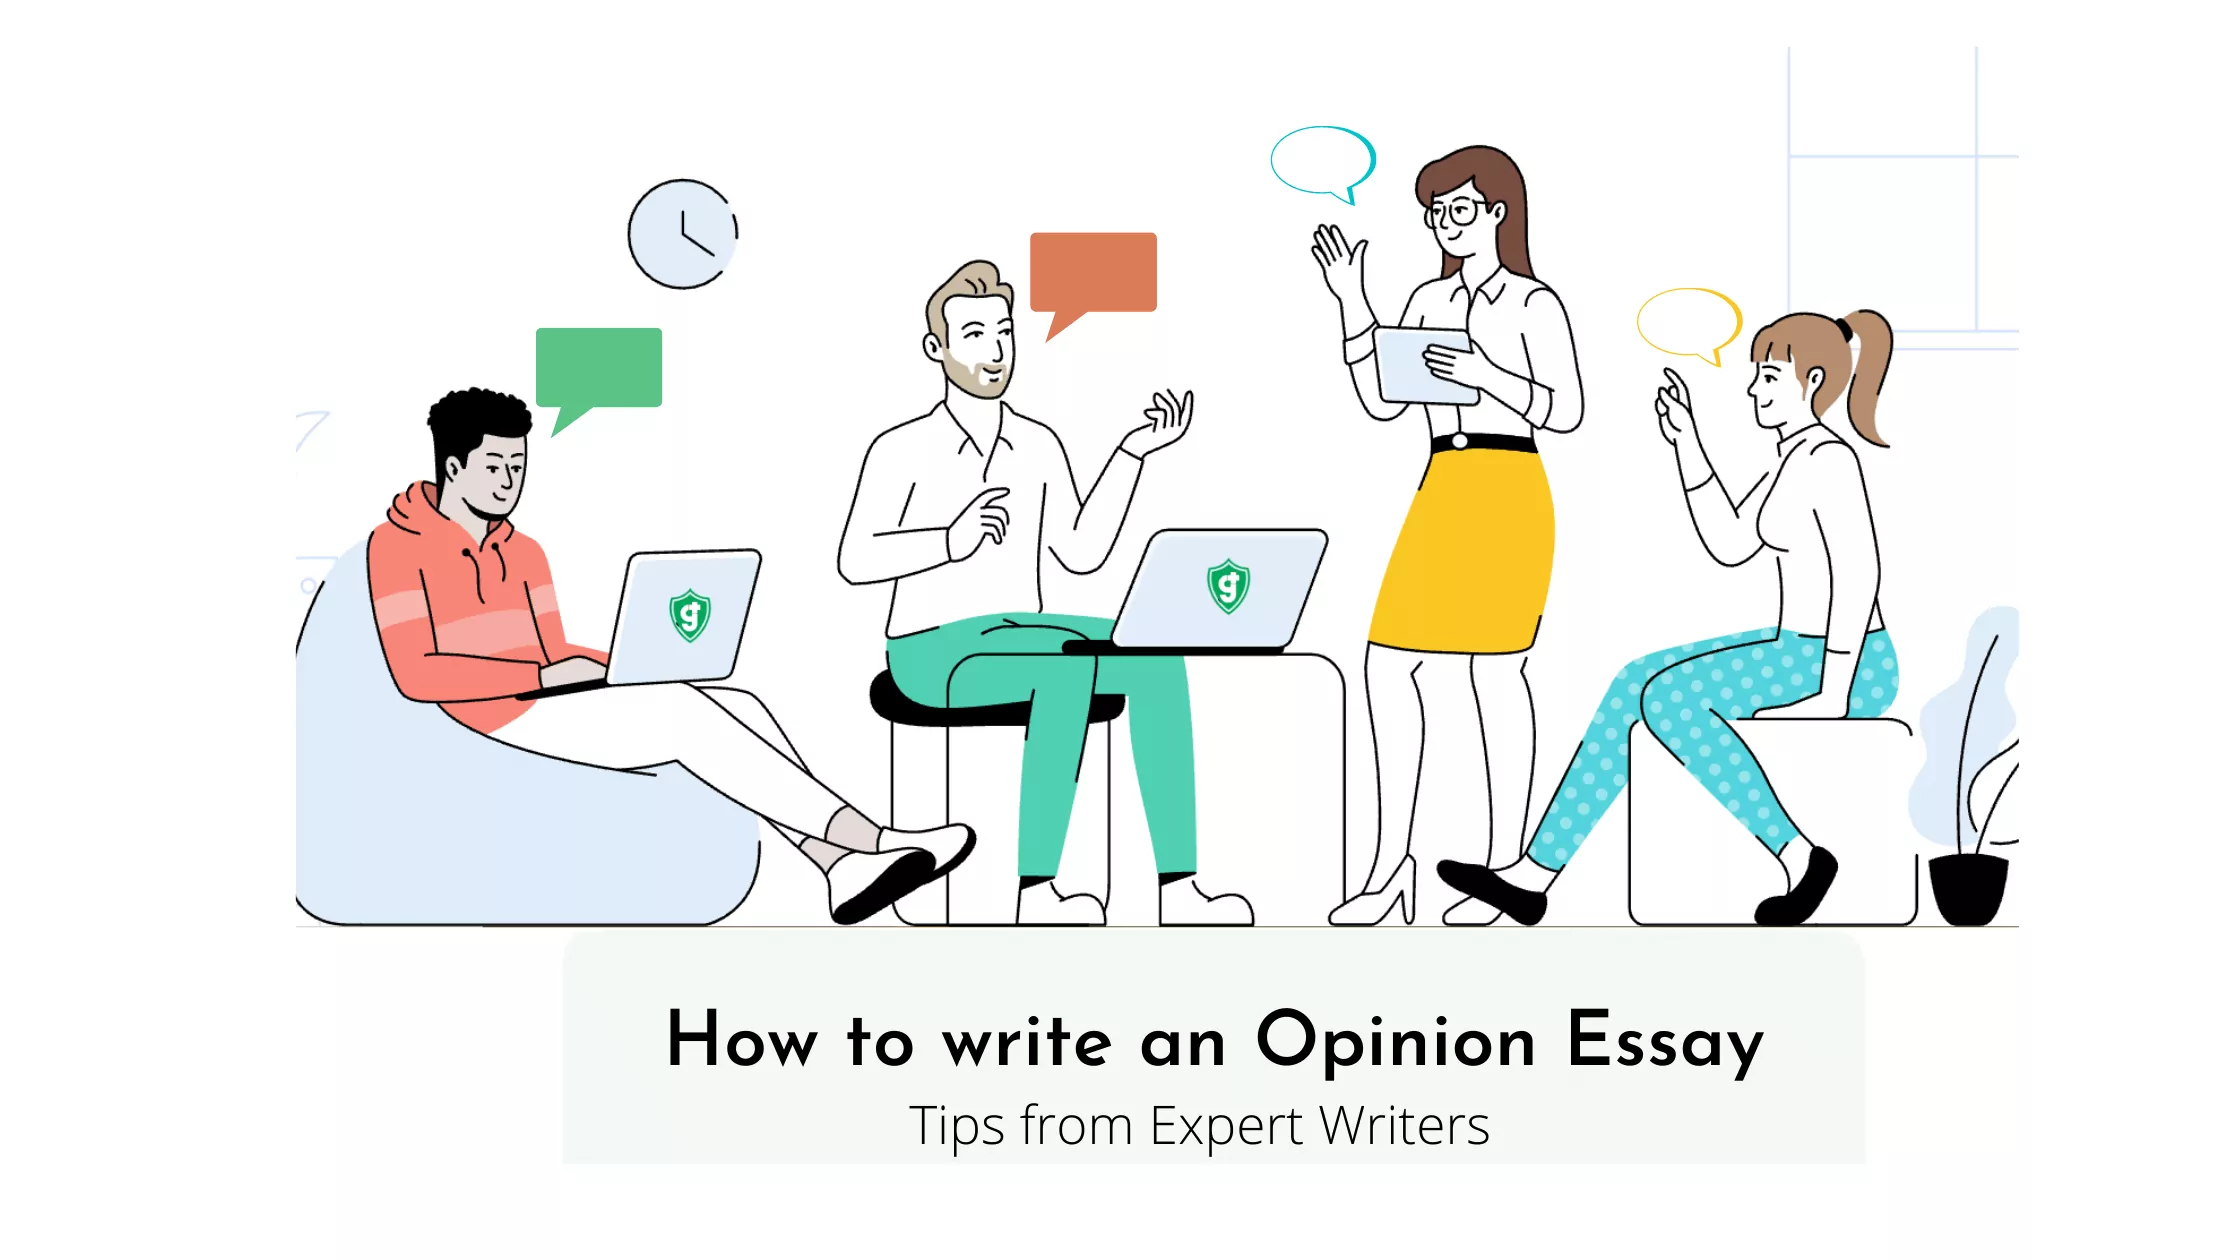 How to write a compelling opinion essay